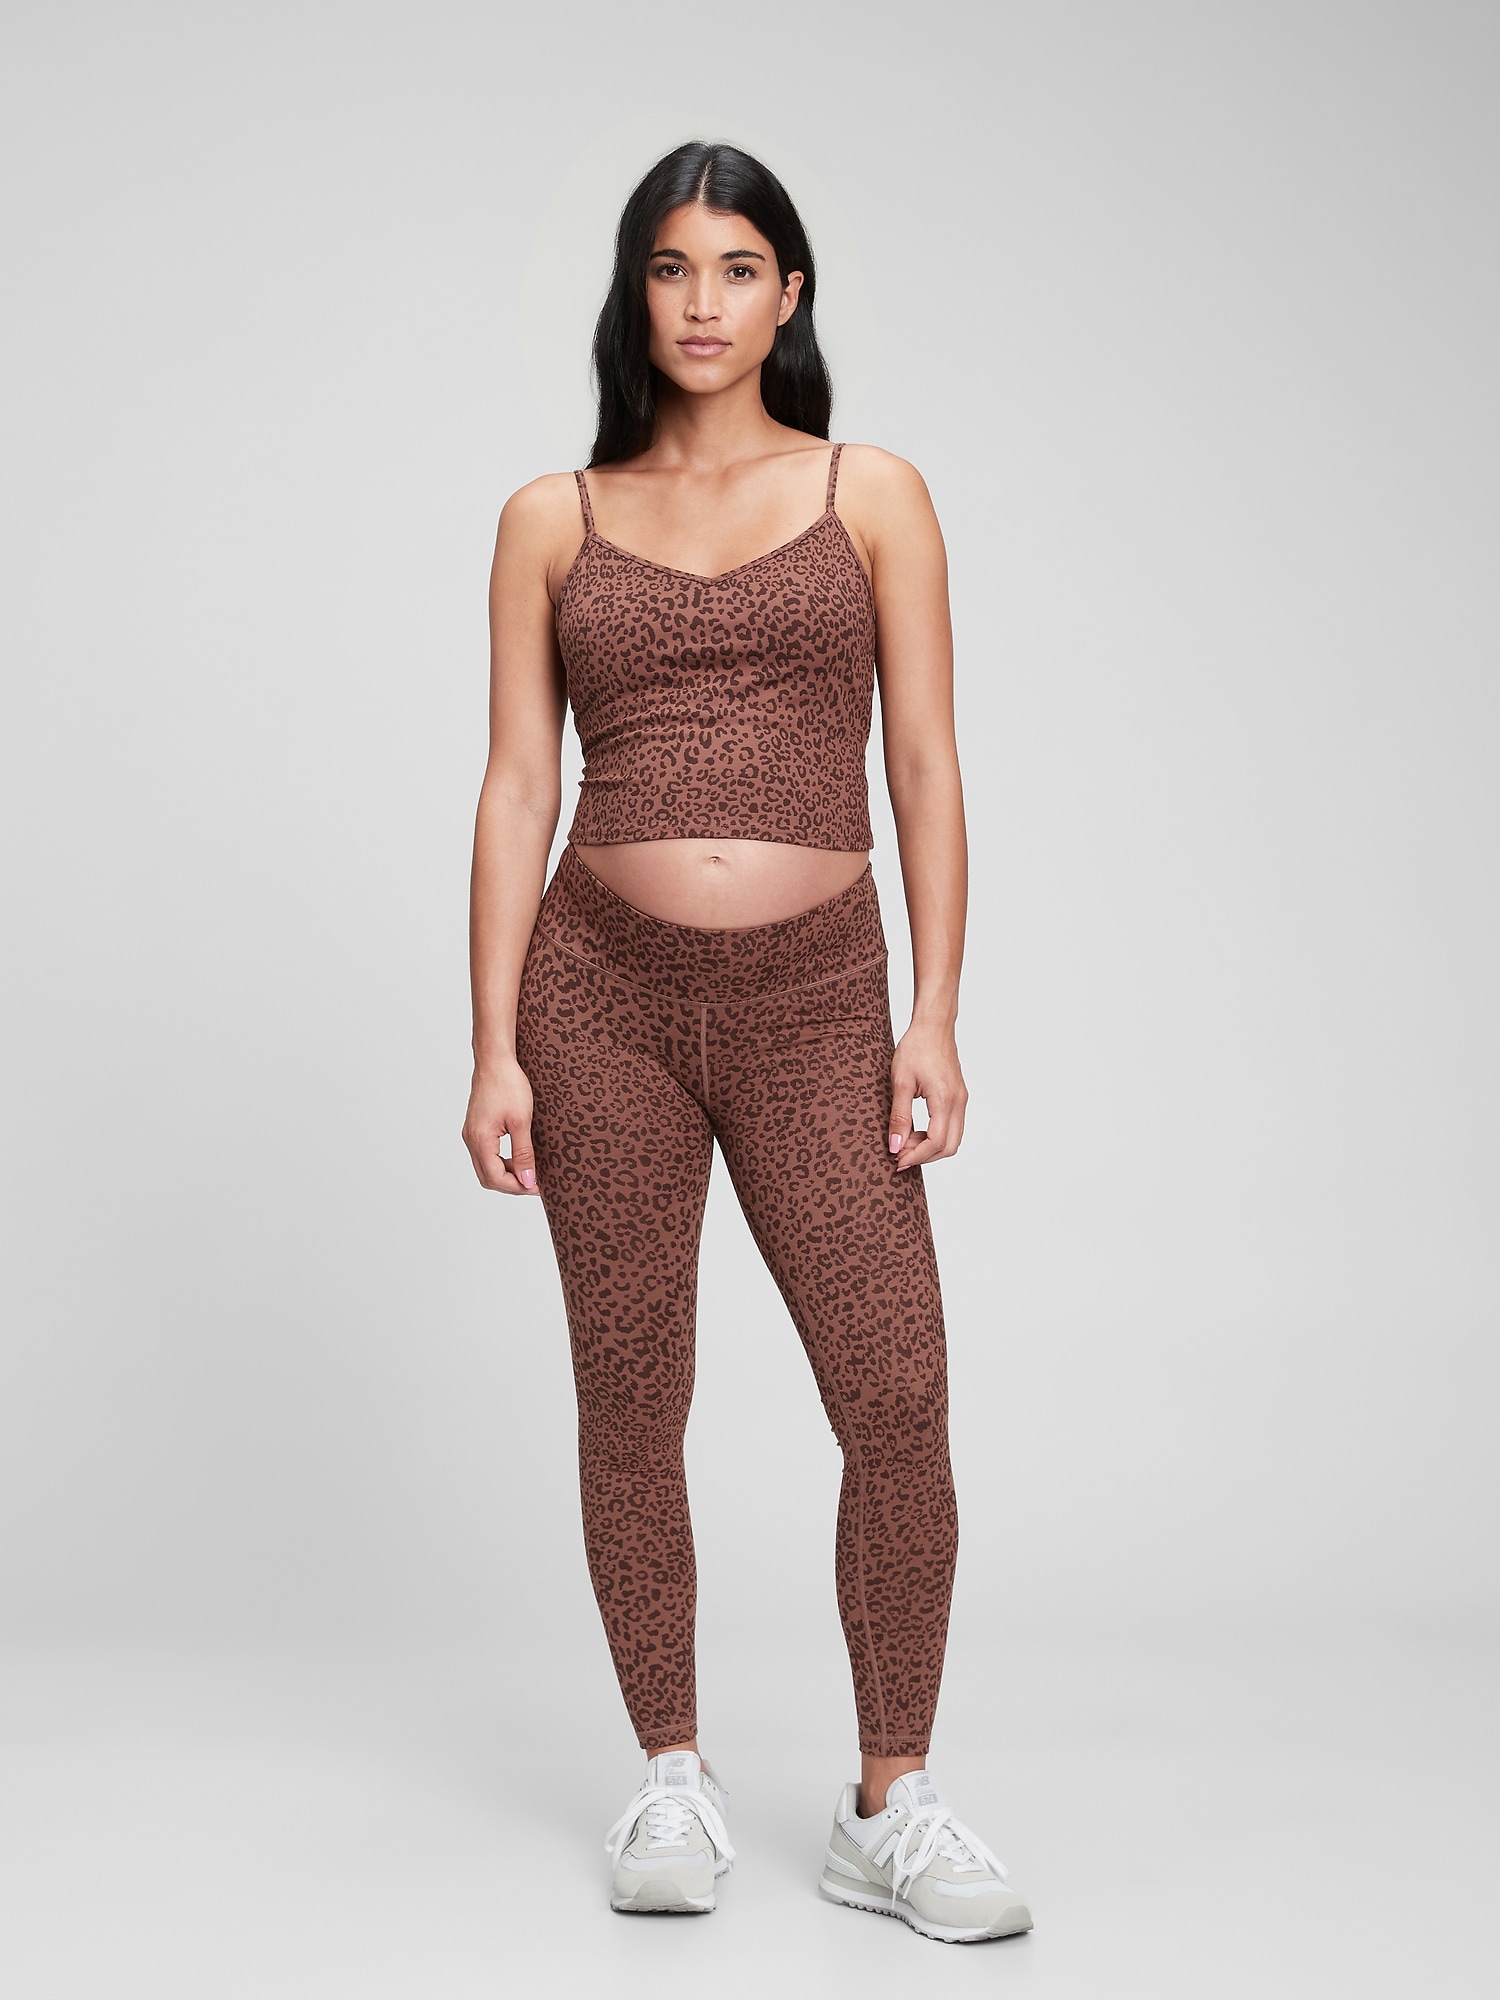 Gap GapFit Textured Stripe Leggings in Sculpt Compression, We Compared 12  Gap Leggings So You Can See Beyond Their Looks